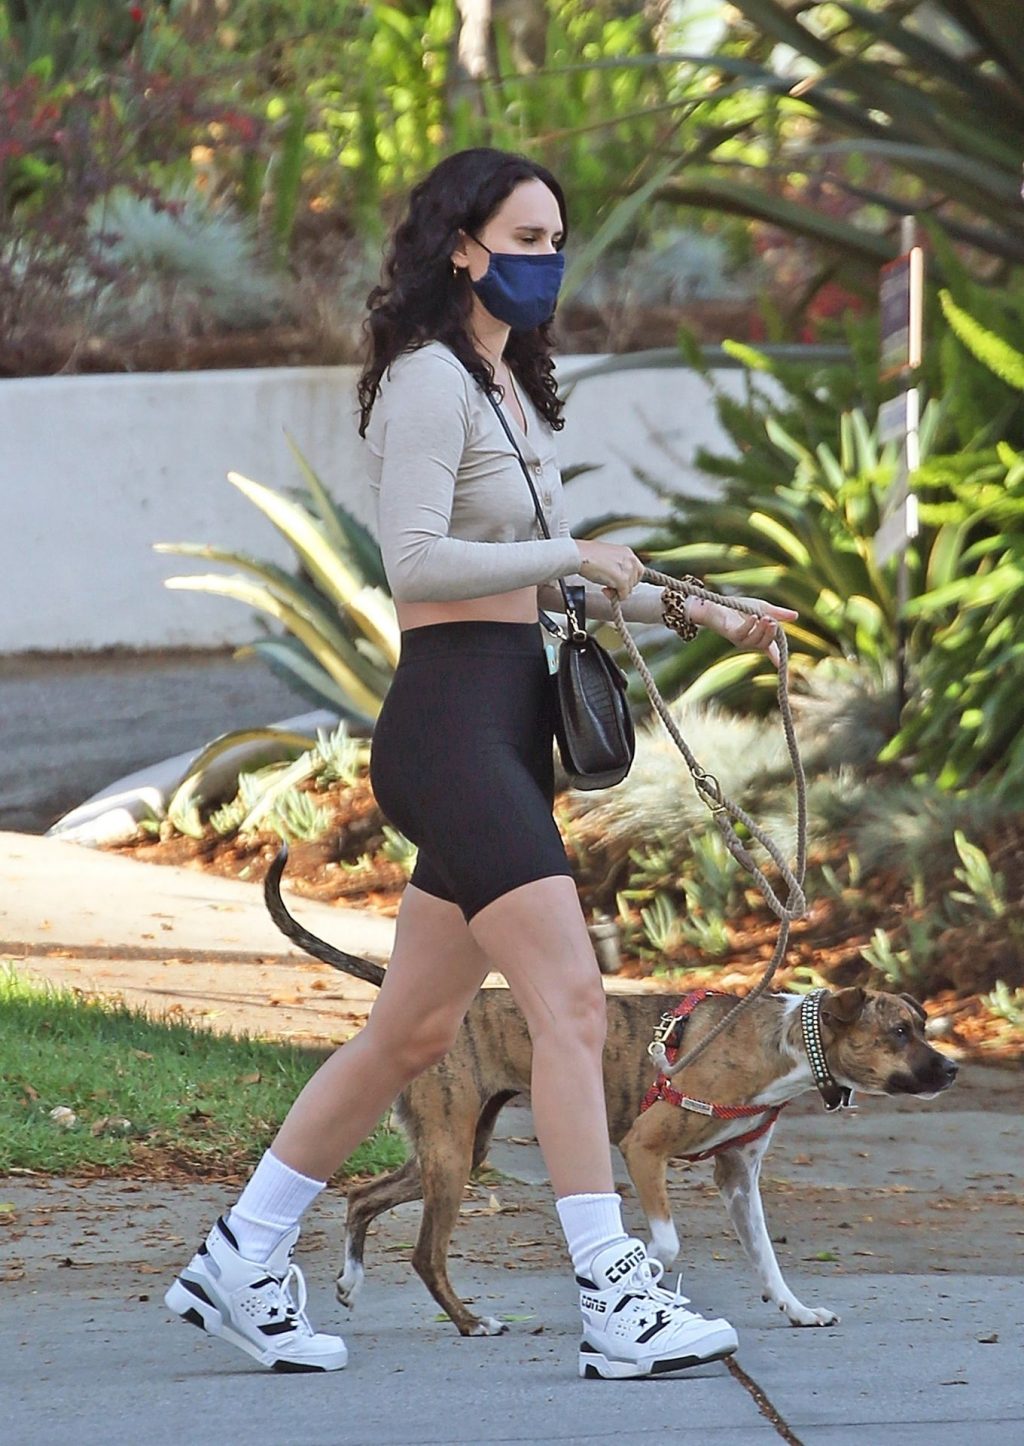 Rumer Willis Has a Busy Day of Hair Extensions and Dog Training in L.A (51 Photos)